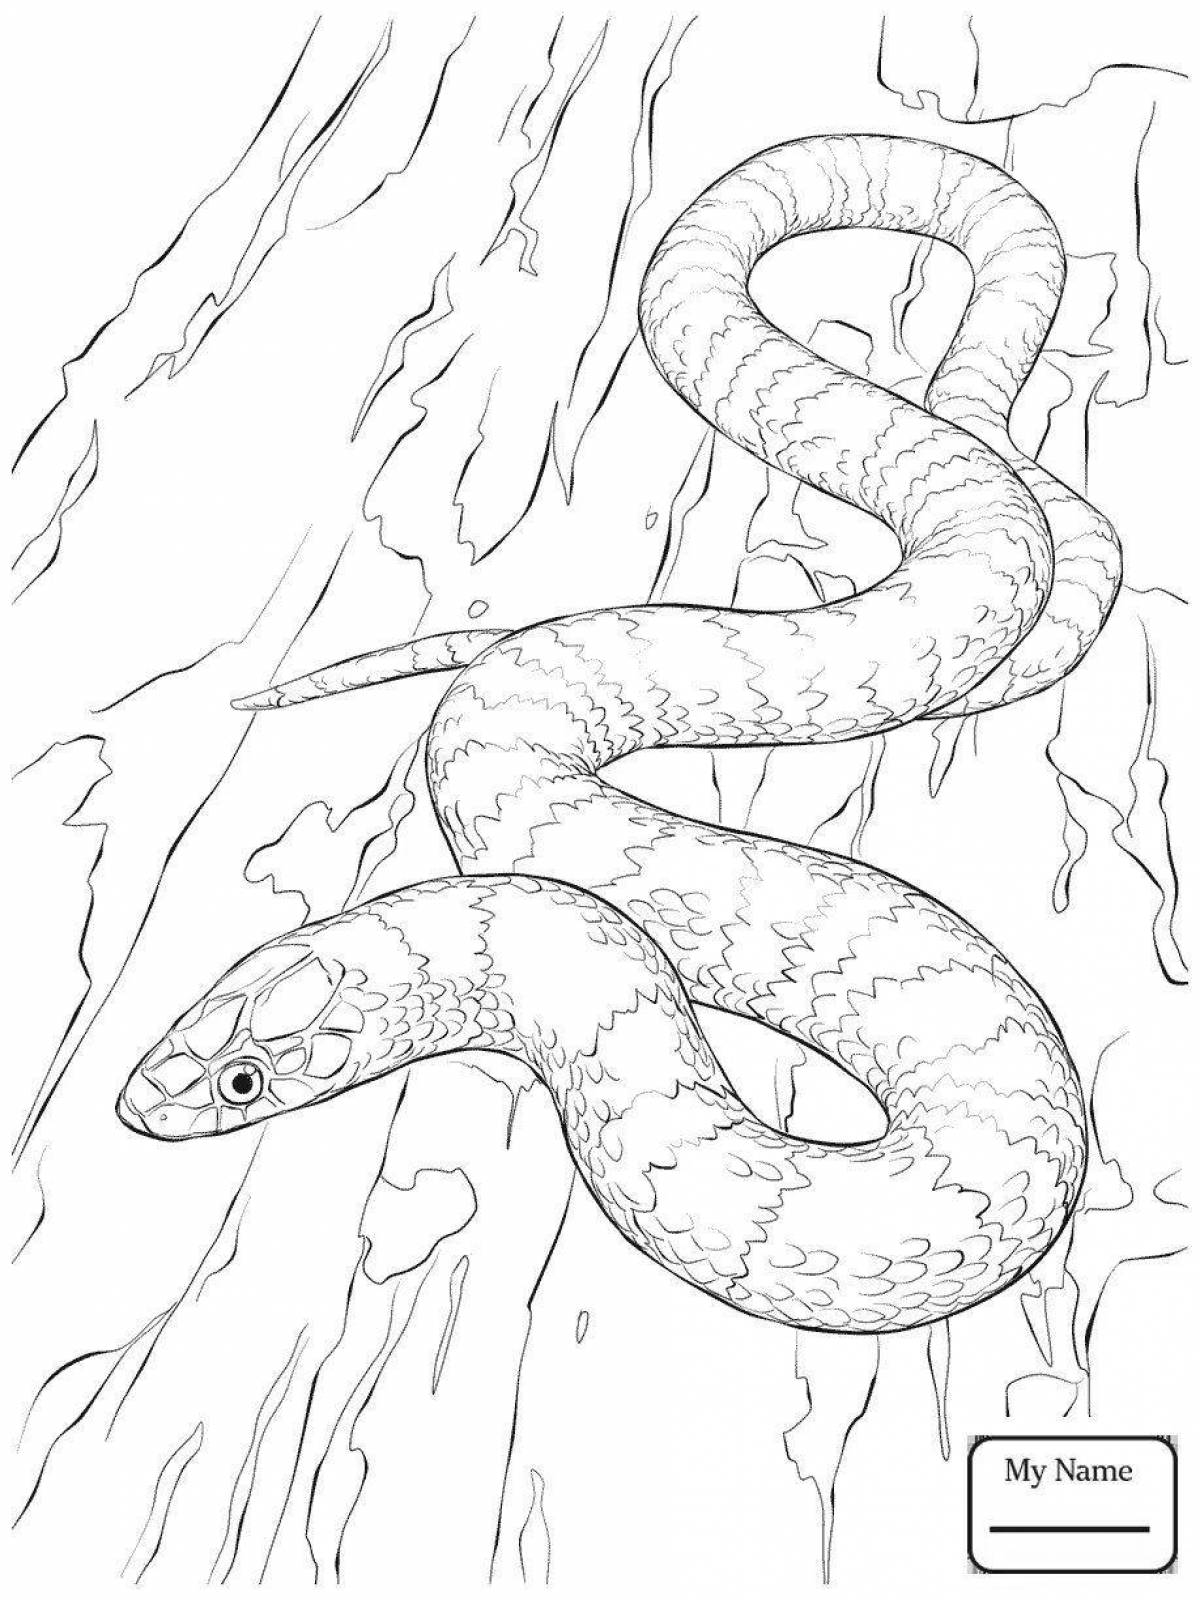 Detailed blue snake coloring page